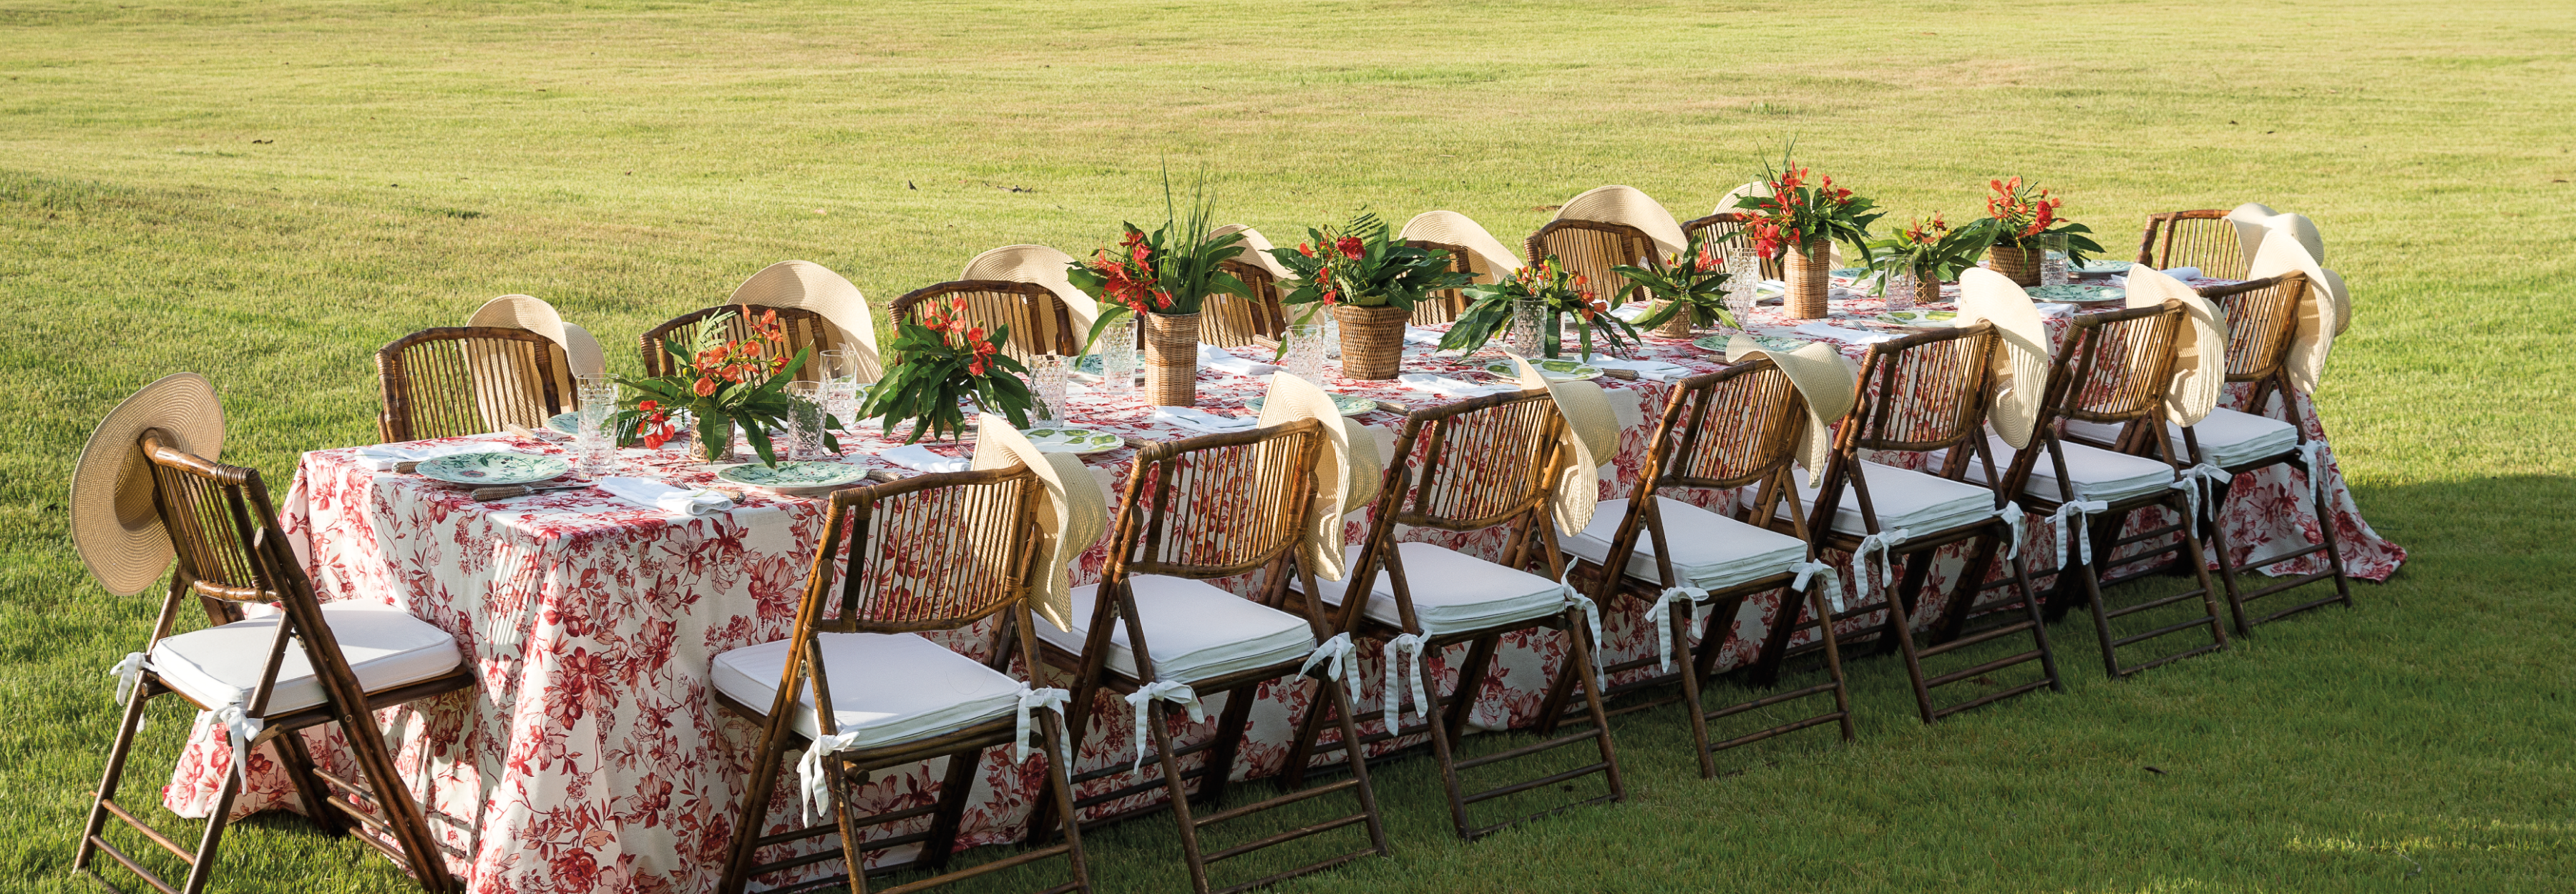 Outdoor sixteen person table setting in the countryside